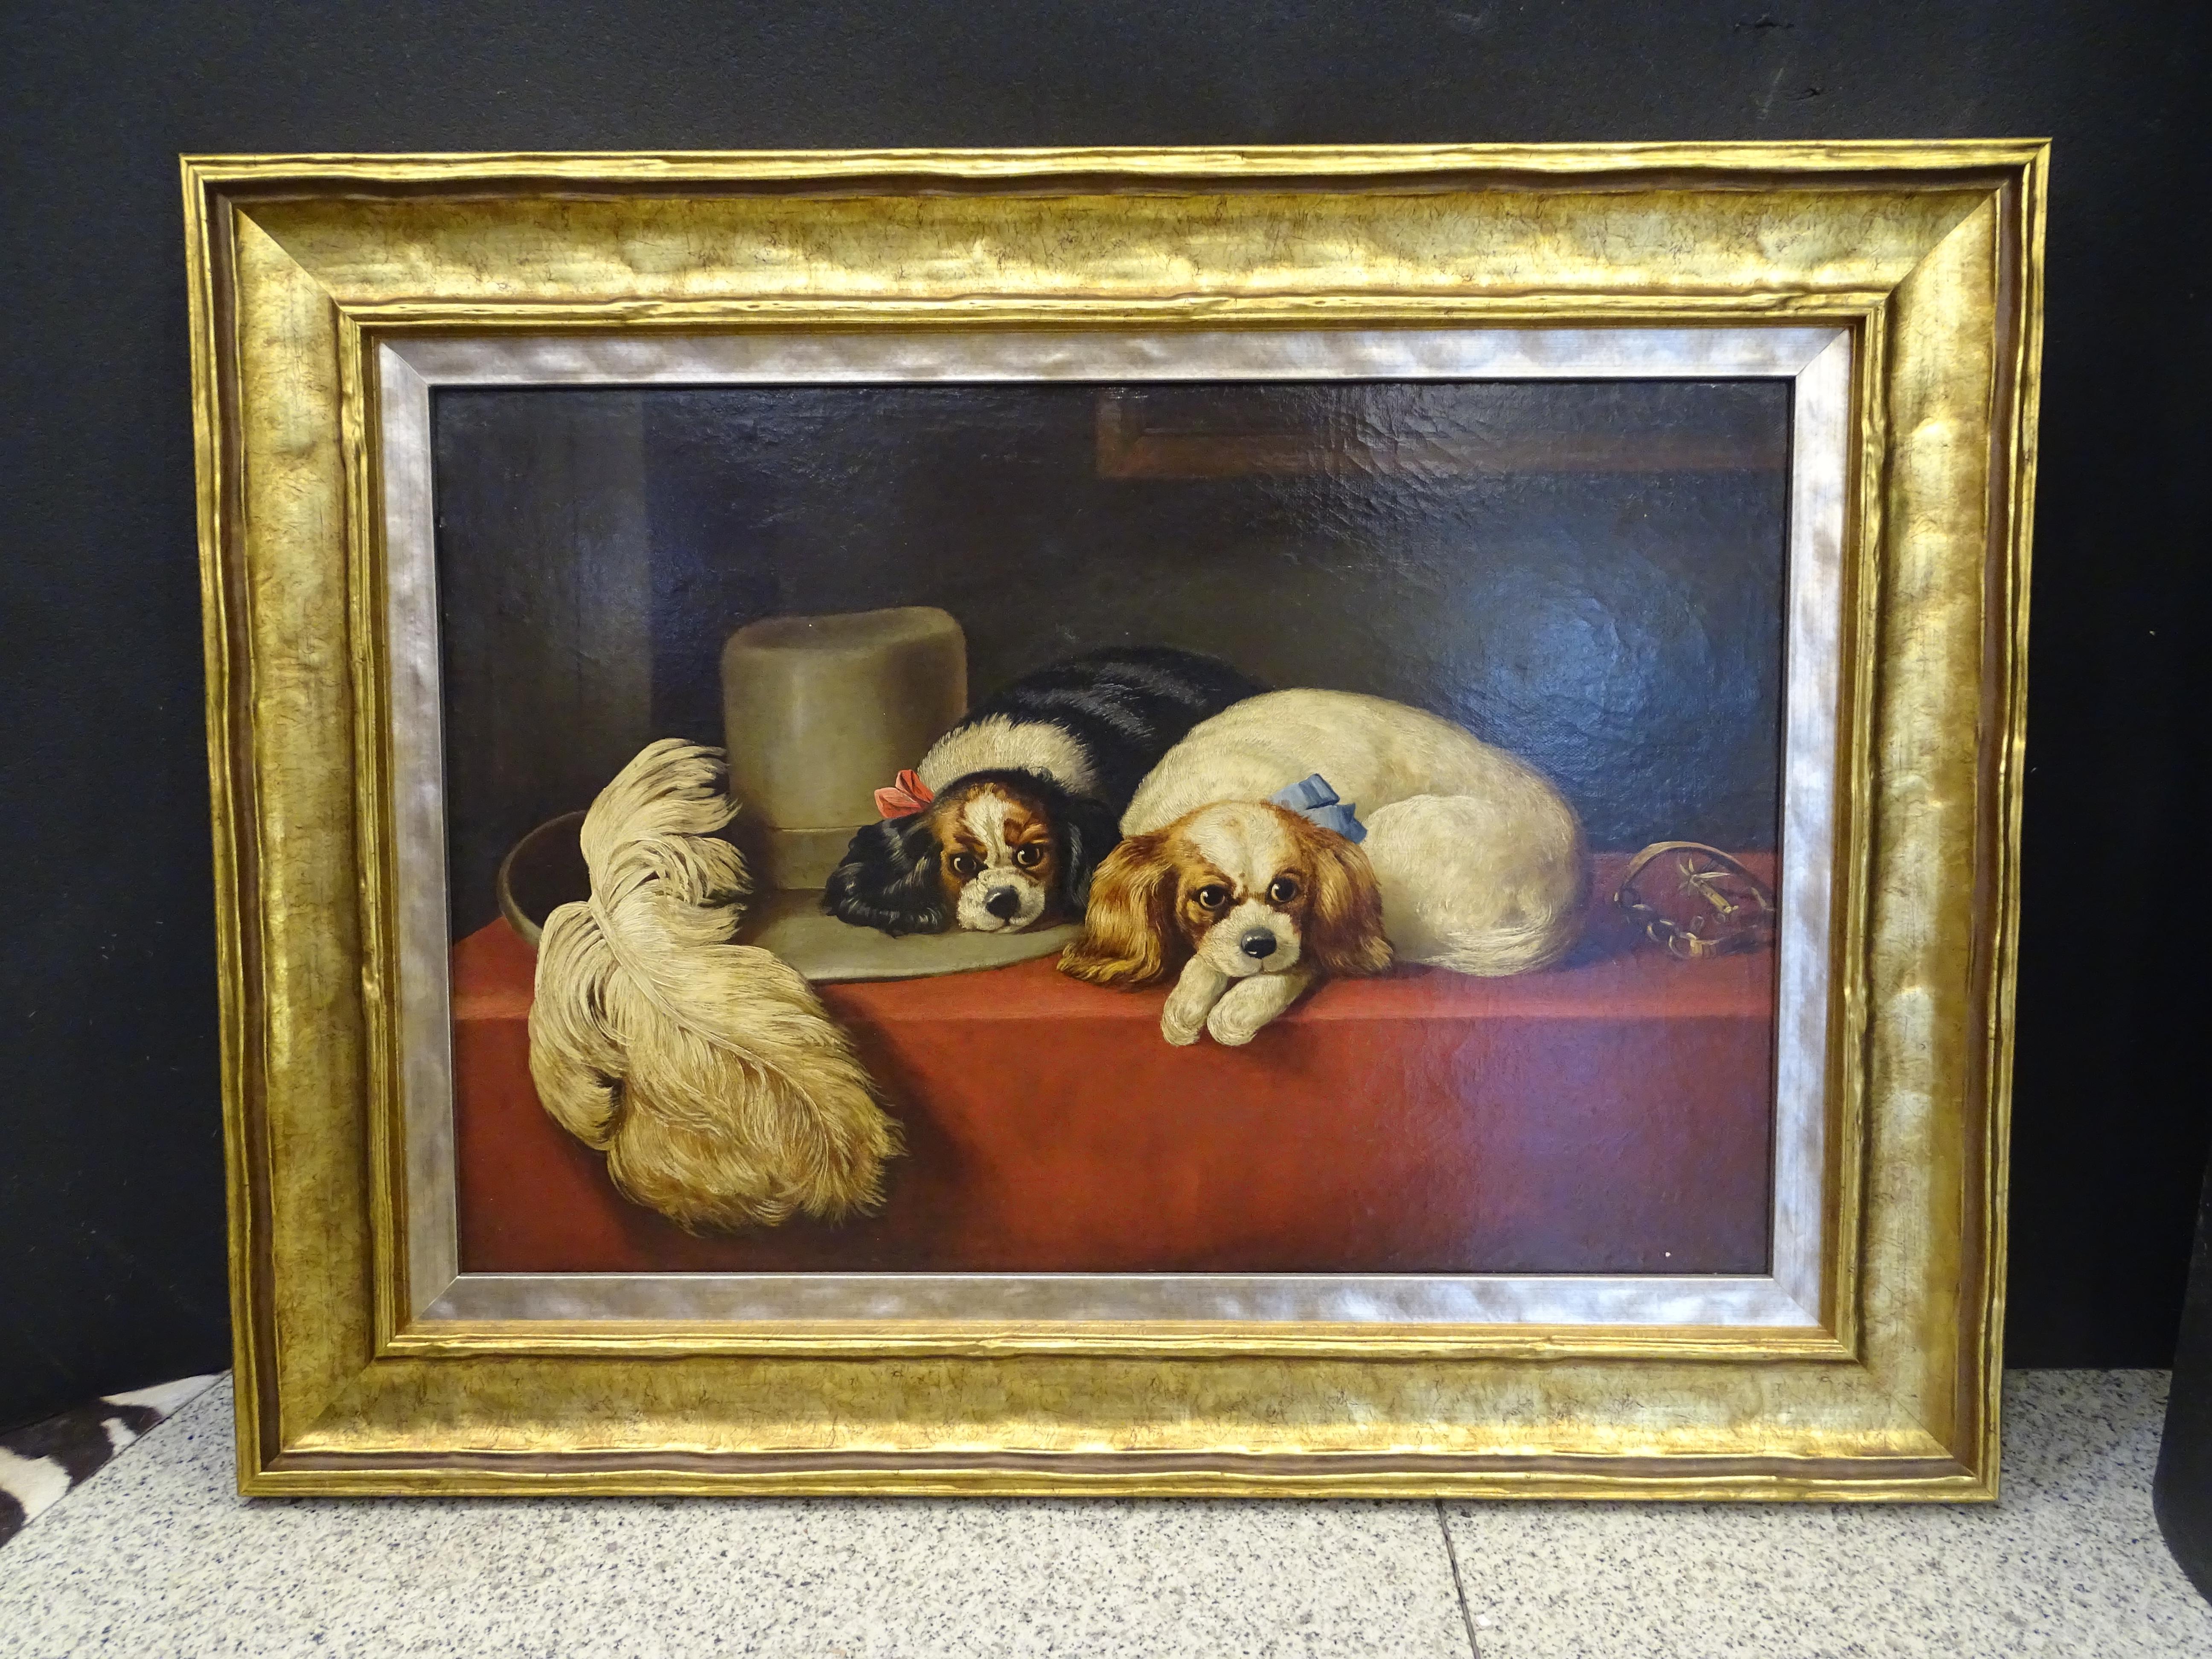 Beautiful painting oil on canvas, 19th century in the English context. The scene describes two dogs of the Cavalier King breed, in relation to the nobility and royalty of that geographical context. The pets are portrayed with realism and a certain